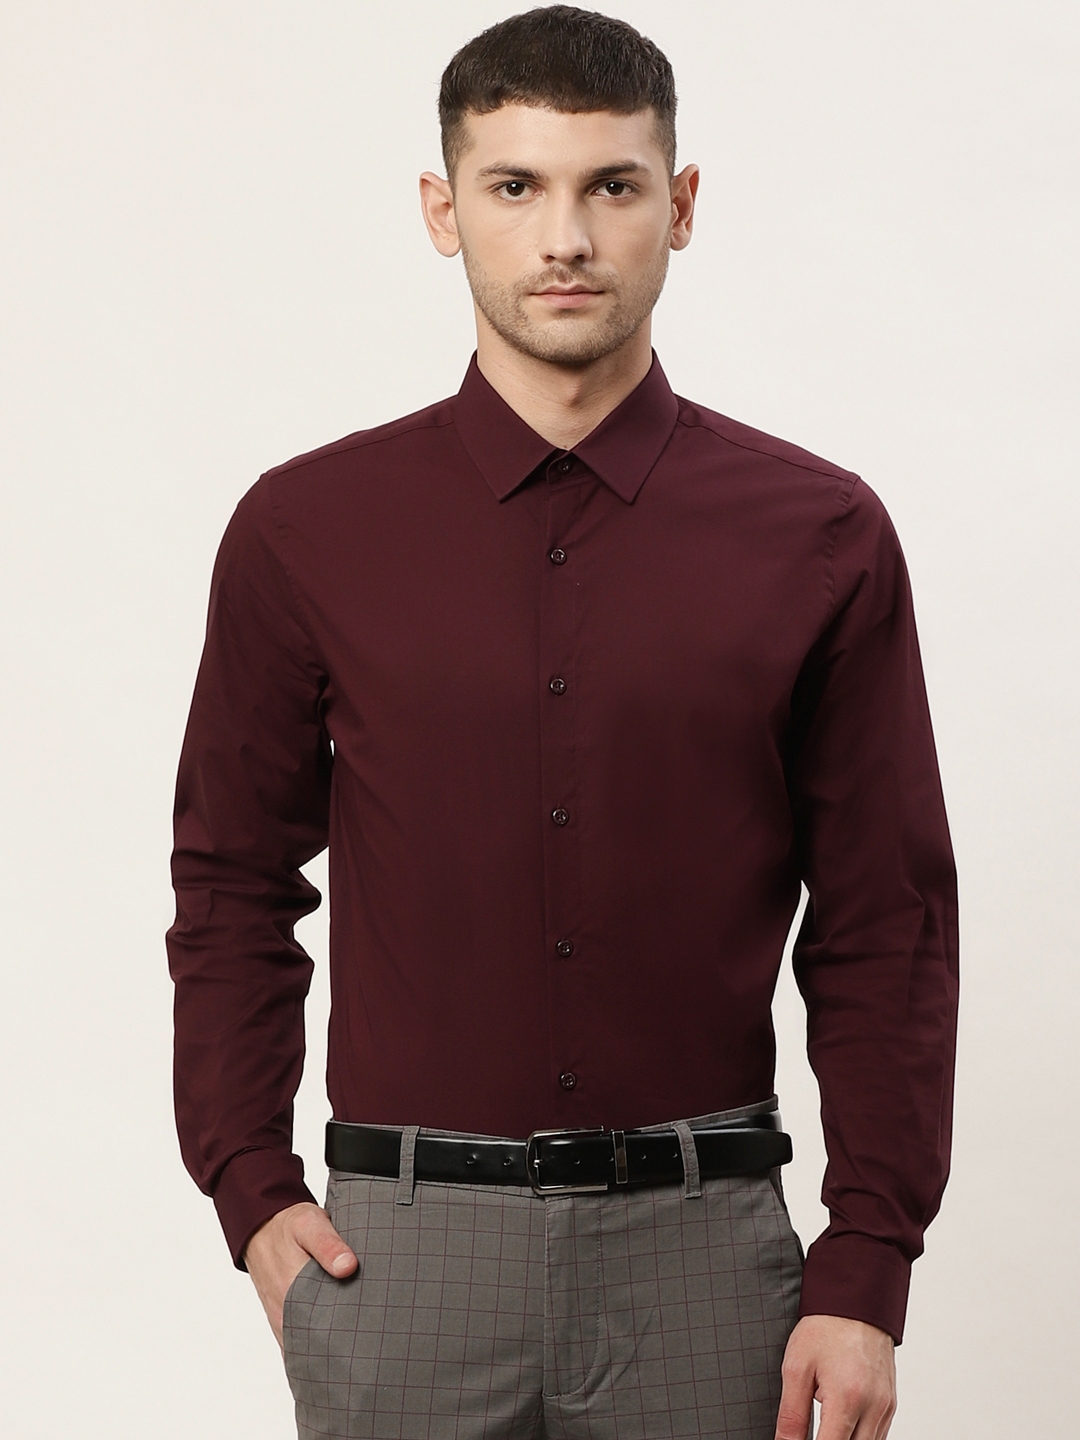 Buy United Colors Of Benetton Men Burgundy Slim Fit Solid Knitted ...